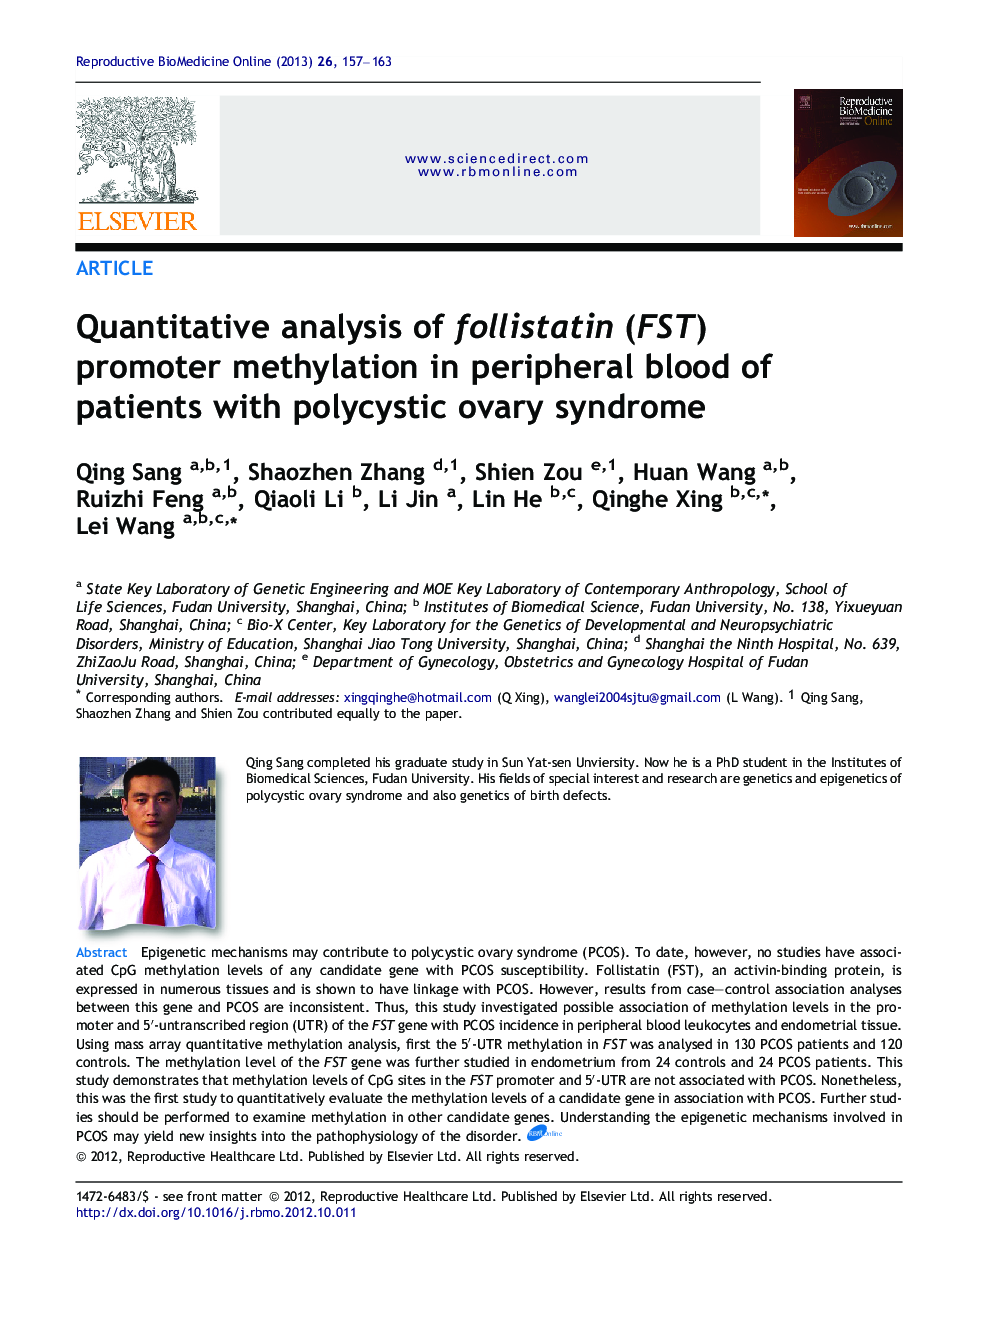 Quantitative analysis of follistatin (FST) promoter methylation in peripheral blood of patients with polycystic ovary syndrome 